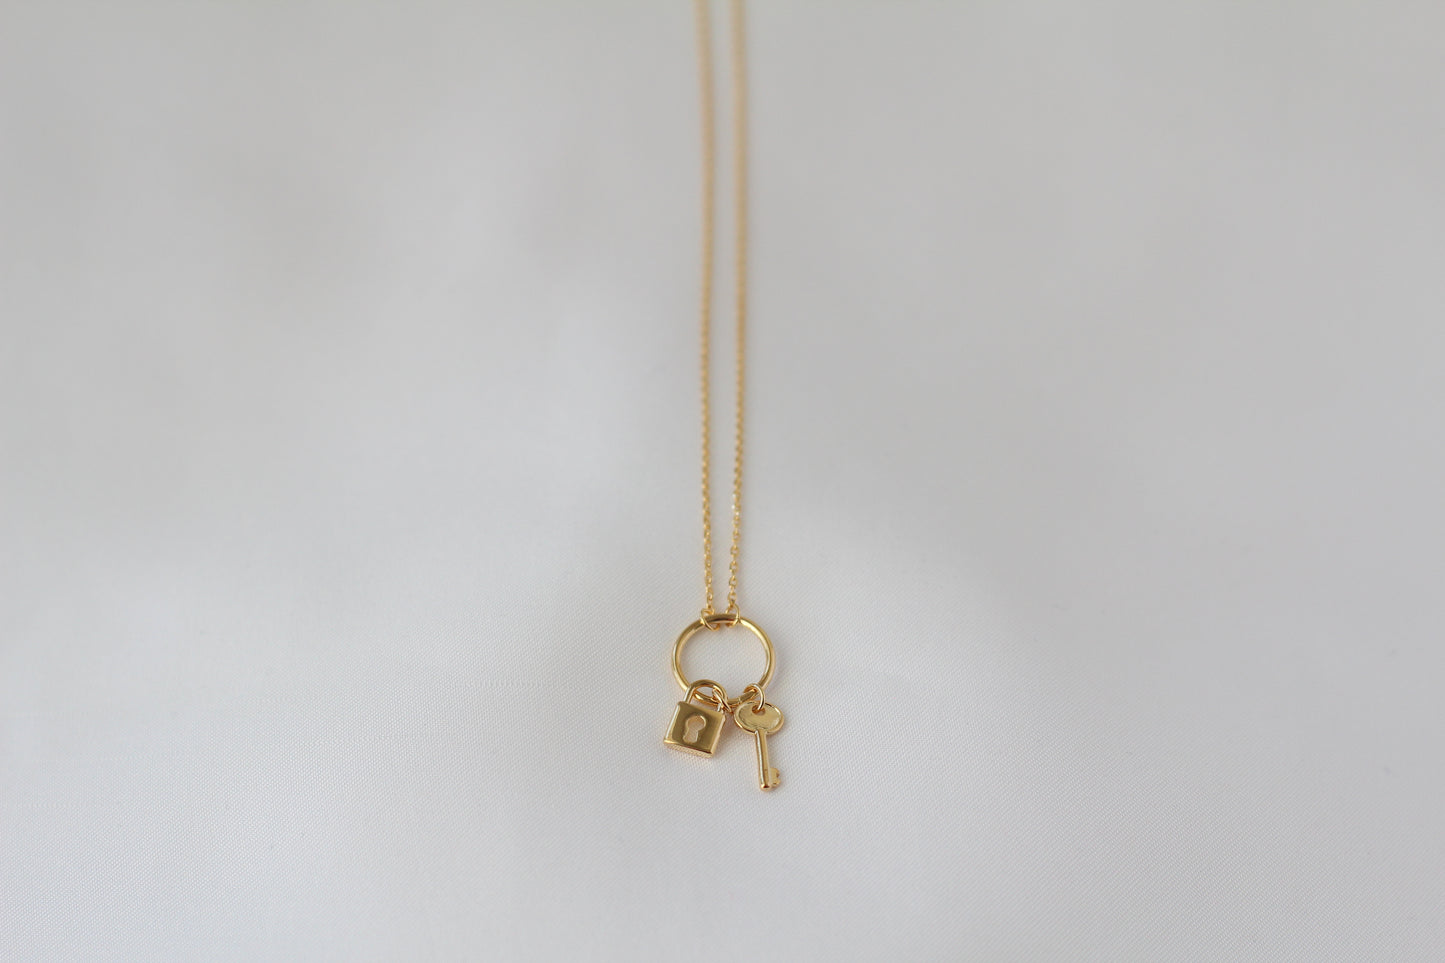 Shiny Lock and Key Ring Necklace Gold